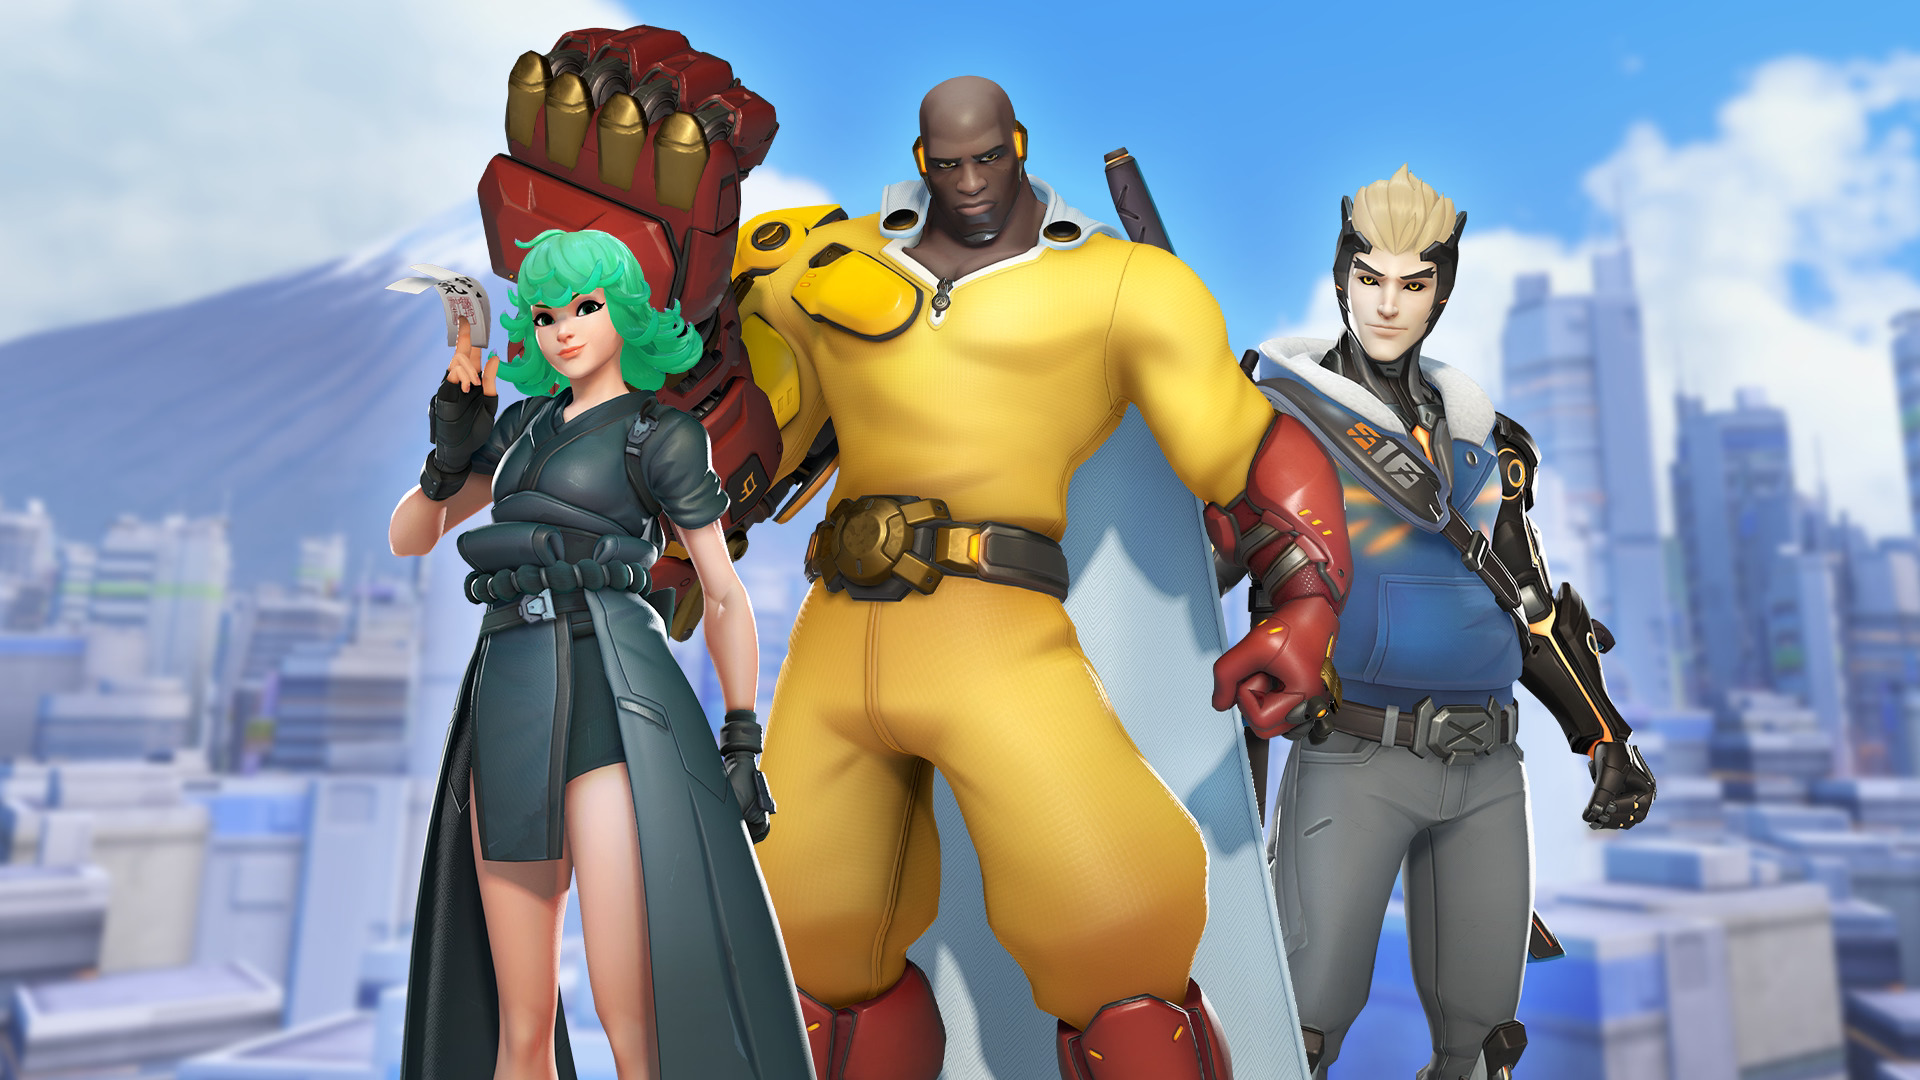 Overwatch 2 players want Pokemon crossover skins after OPM anime  collaboration - Dexerto : r/videogames